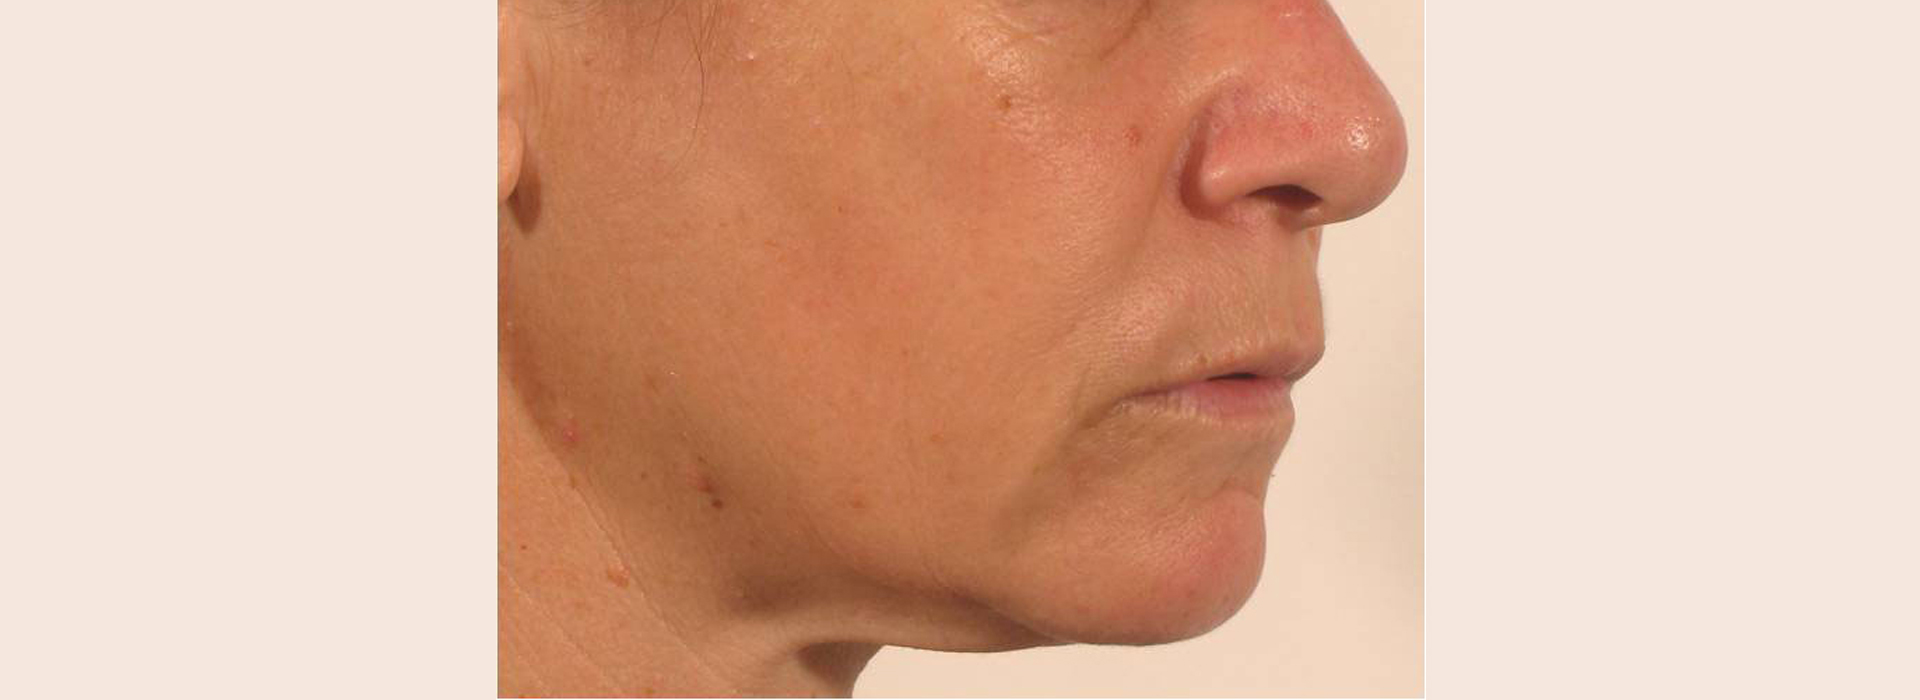 Legend before and after pics - skin tightening therapy